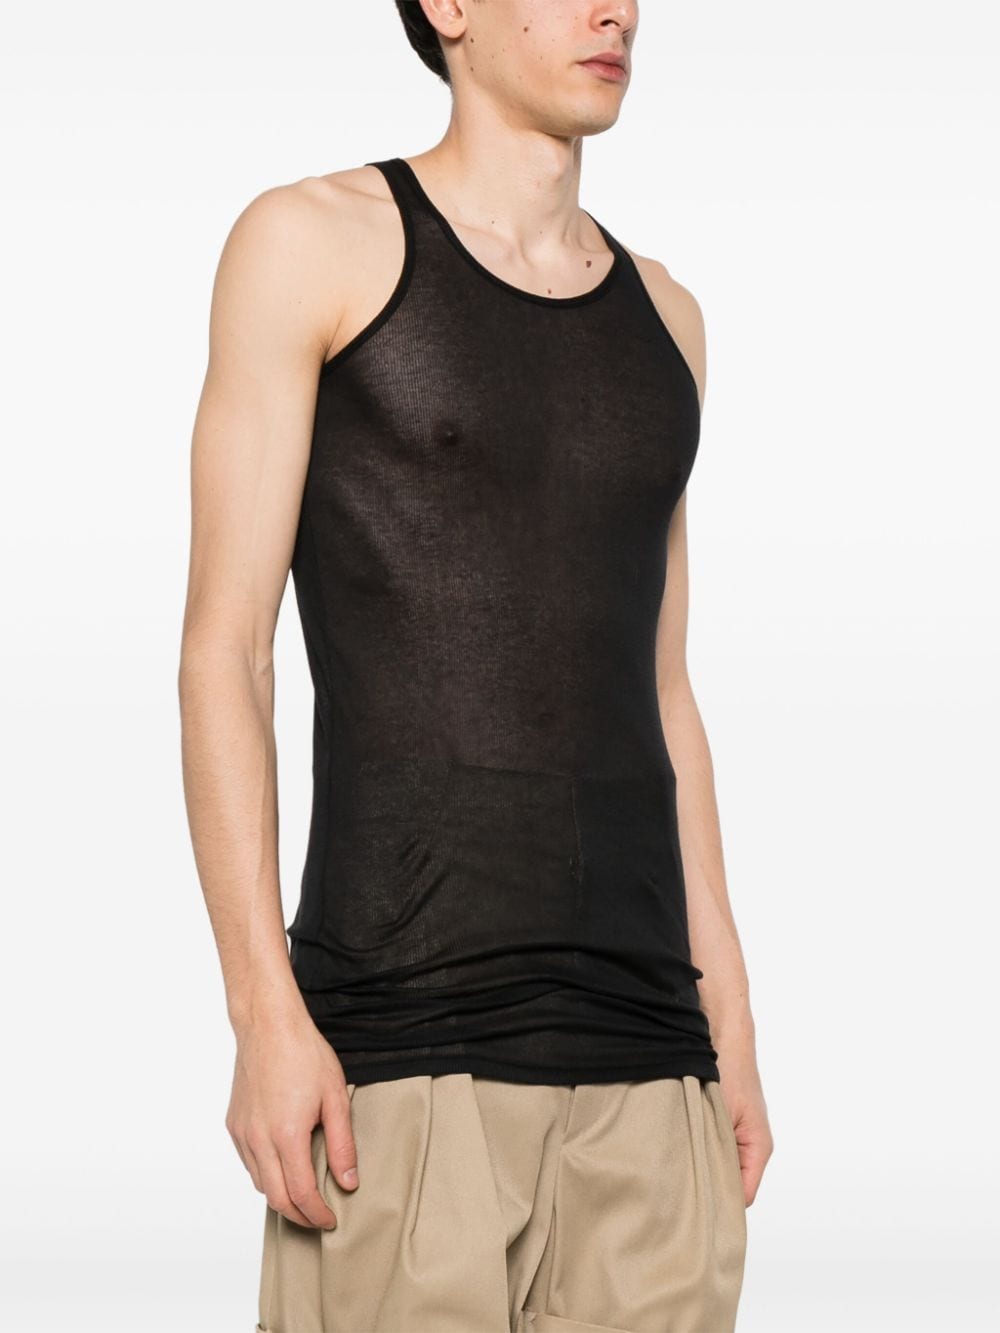 FINE-RIBBED TANK TOP